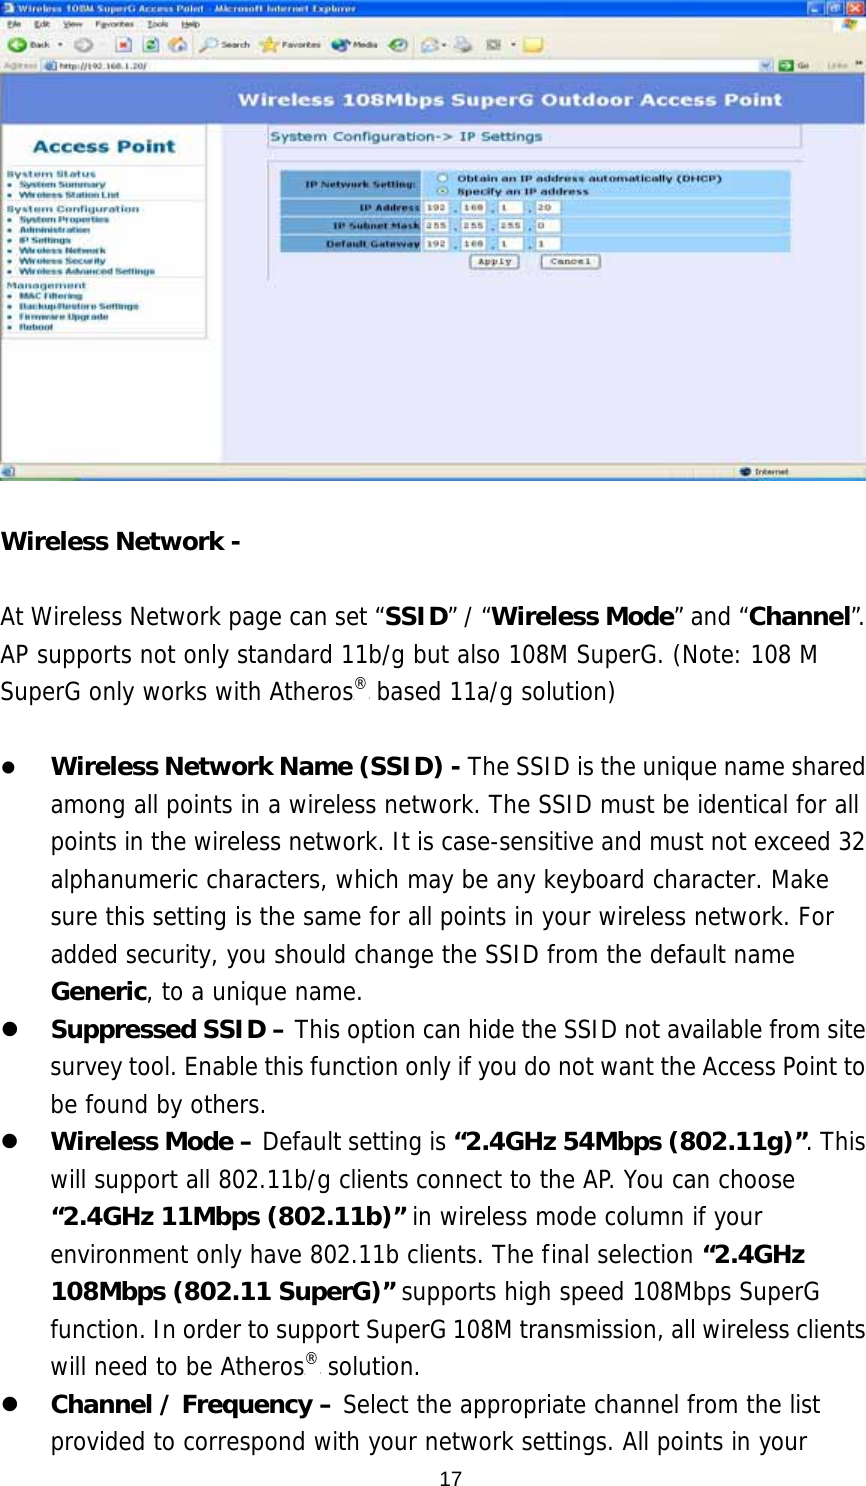  17  Wireless Network -    At Wireless Network page can set “SSID” / “Wireless Mode” and “Channel”. AP supports not only standard 11b/g but also 108M SuperG. (Note: 108 M SuperG only works with AtherosP®P based 11a/g solution)    Wireless Network Name (SSID) - The SSID is the unique name shared among all points in a wireless network. The SSID must be identical for all points in the wireless network. It is case-sensitive and must not exceed 32 alphanumeric characters, which may be any keyboard character. Make sure this setting is the same for all points in your wireless network. For added security, you should change the SSID from the default name Generic, to a unique name.   Suppressed SSID – This option can hide the SSID not available from site survey tool. Enable this function only if you do not want the Access Point to be found by others.   Wireless Mode – Default setting is “2.4GHz 54Mbps (802.11g)”. This will support all 802.11b/g clients connect to the AP. You can choose “2.4GHz 11Mbps (802.11b)” in wireless mode column if your environment only have 802.11b clients. The final selection “2.4GHz 108Mbps (802.11 SuperG)” supports high speed 108Mbps SuperG function. In order to support SuperG 108M transmission, all wireless clients will need to be AtherosP®P solution.    Channel / Frequency – Select the appropriate channel from the list provided to correspond with your network settings. All points in your 